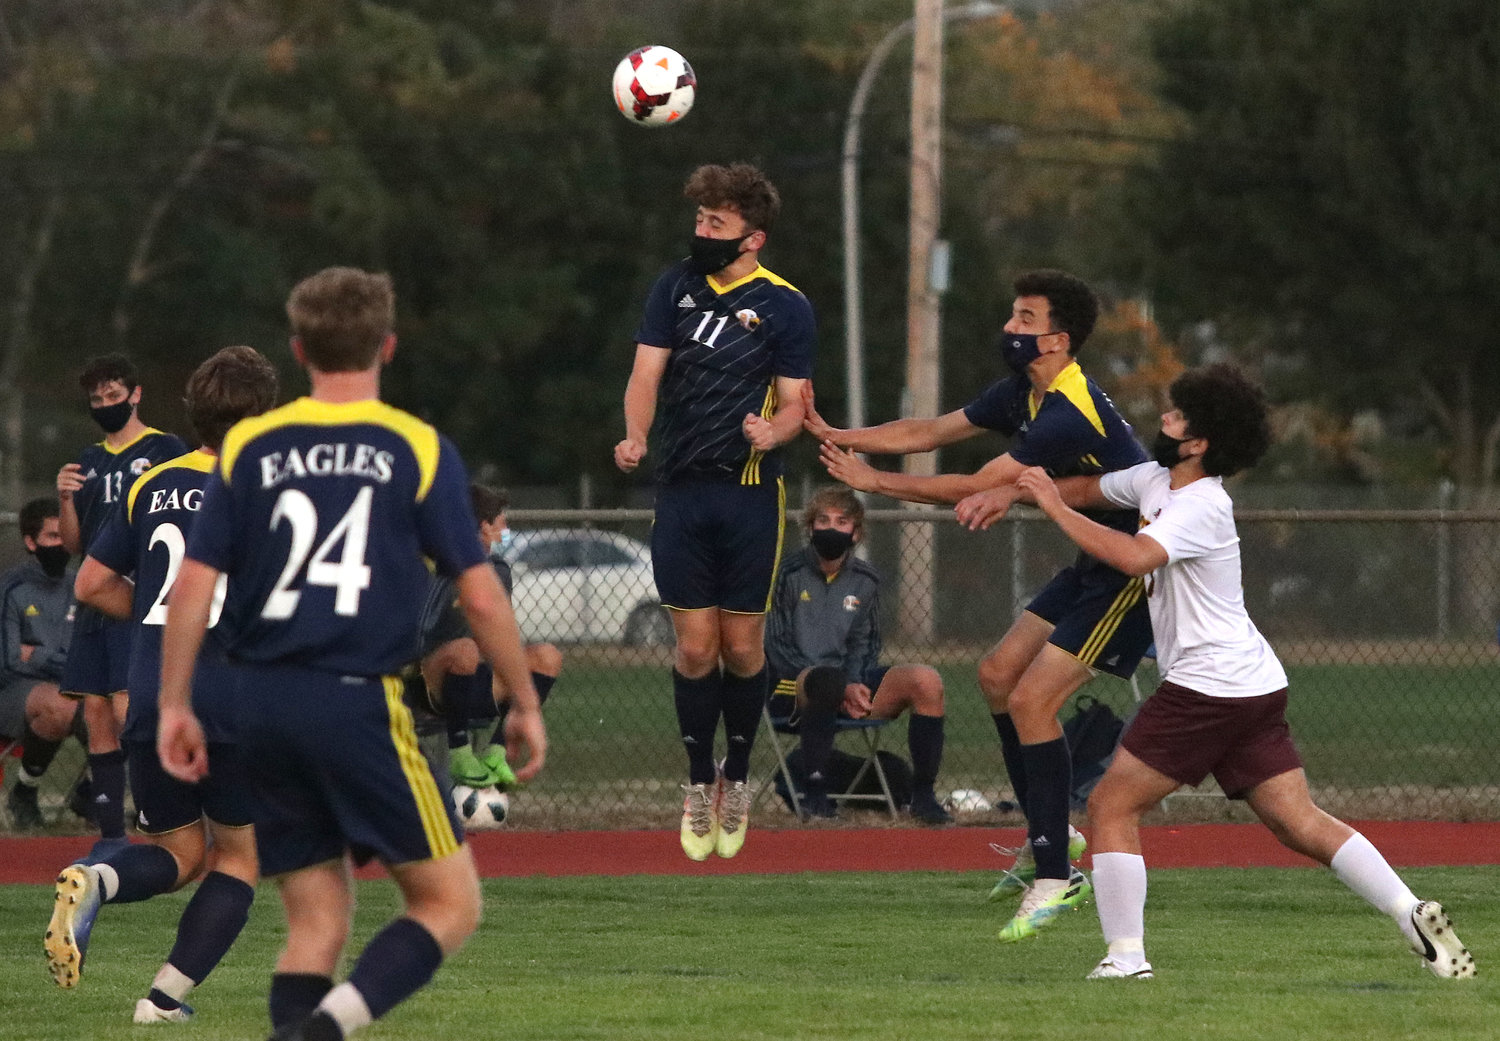 Dan Enos rises up for a header, while teammate Ned Shapiro (right) moves in. Barrington and Tiverton played to a 0-0 tie in a non-league game last week.